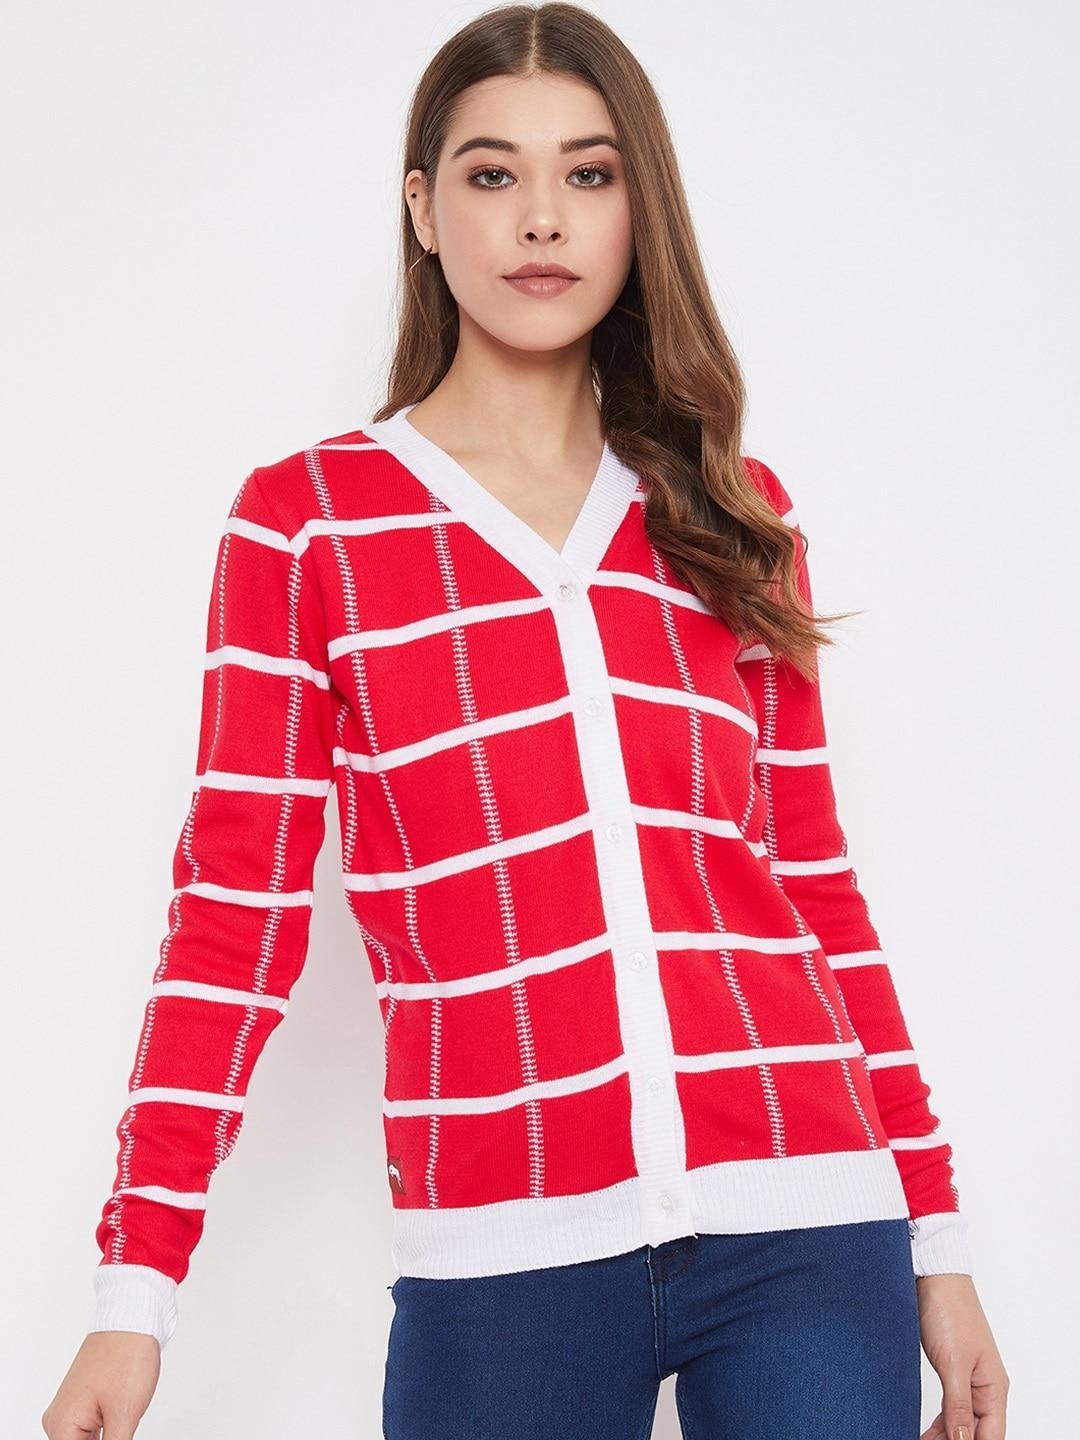 JUMP USA Women Red & White Checked Knitted Cardigan